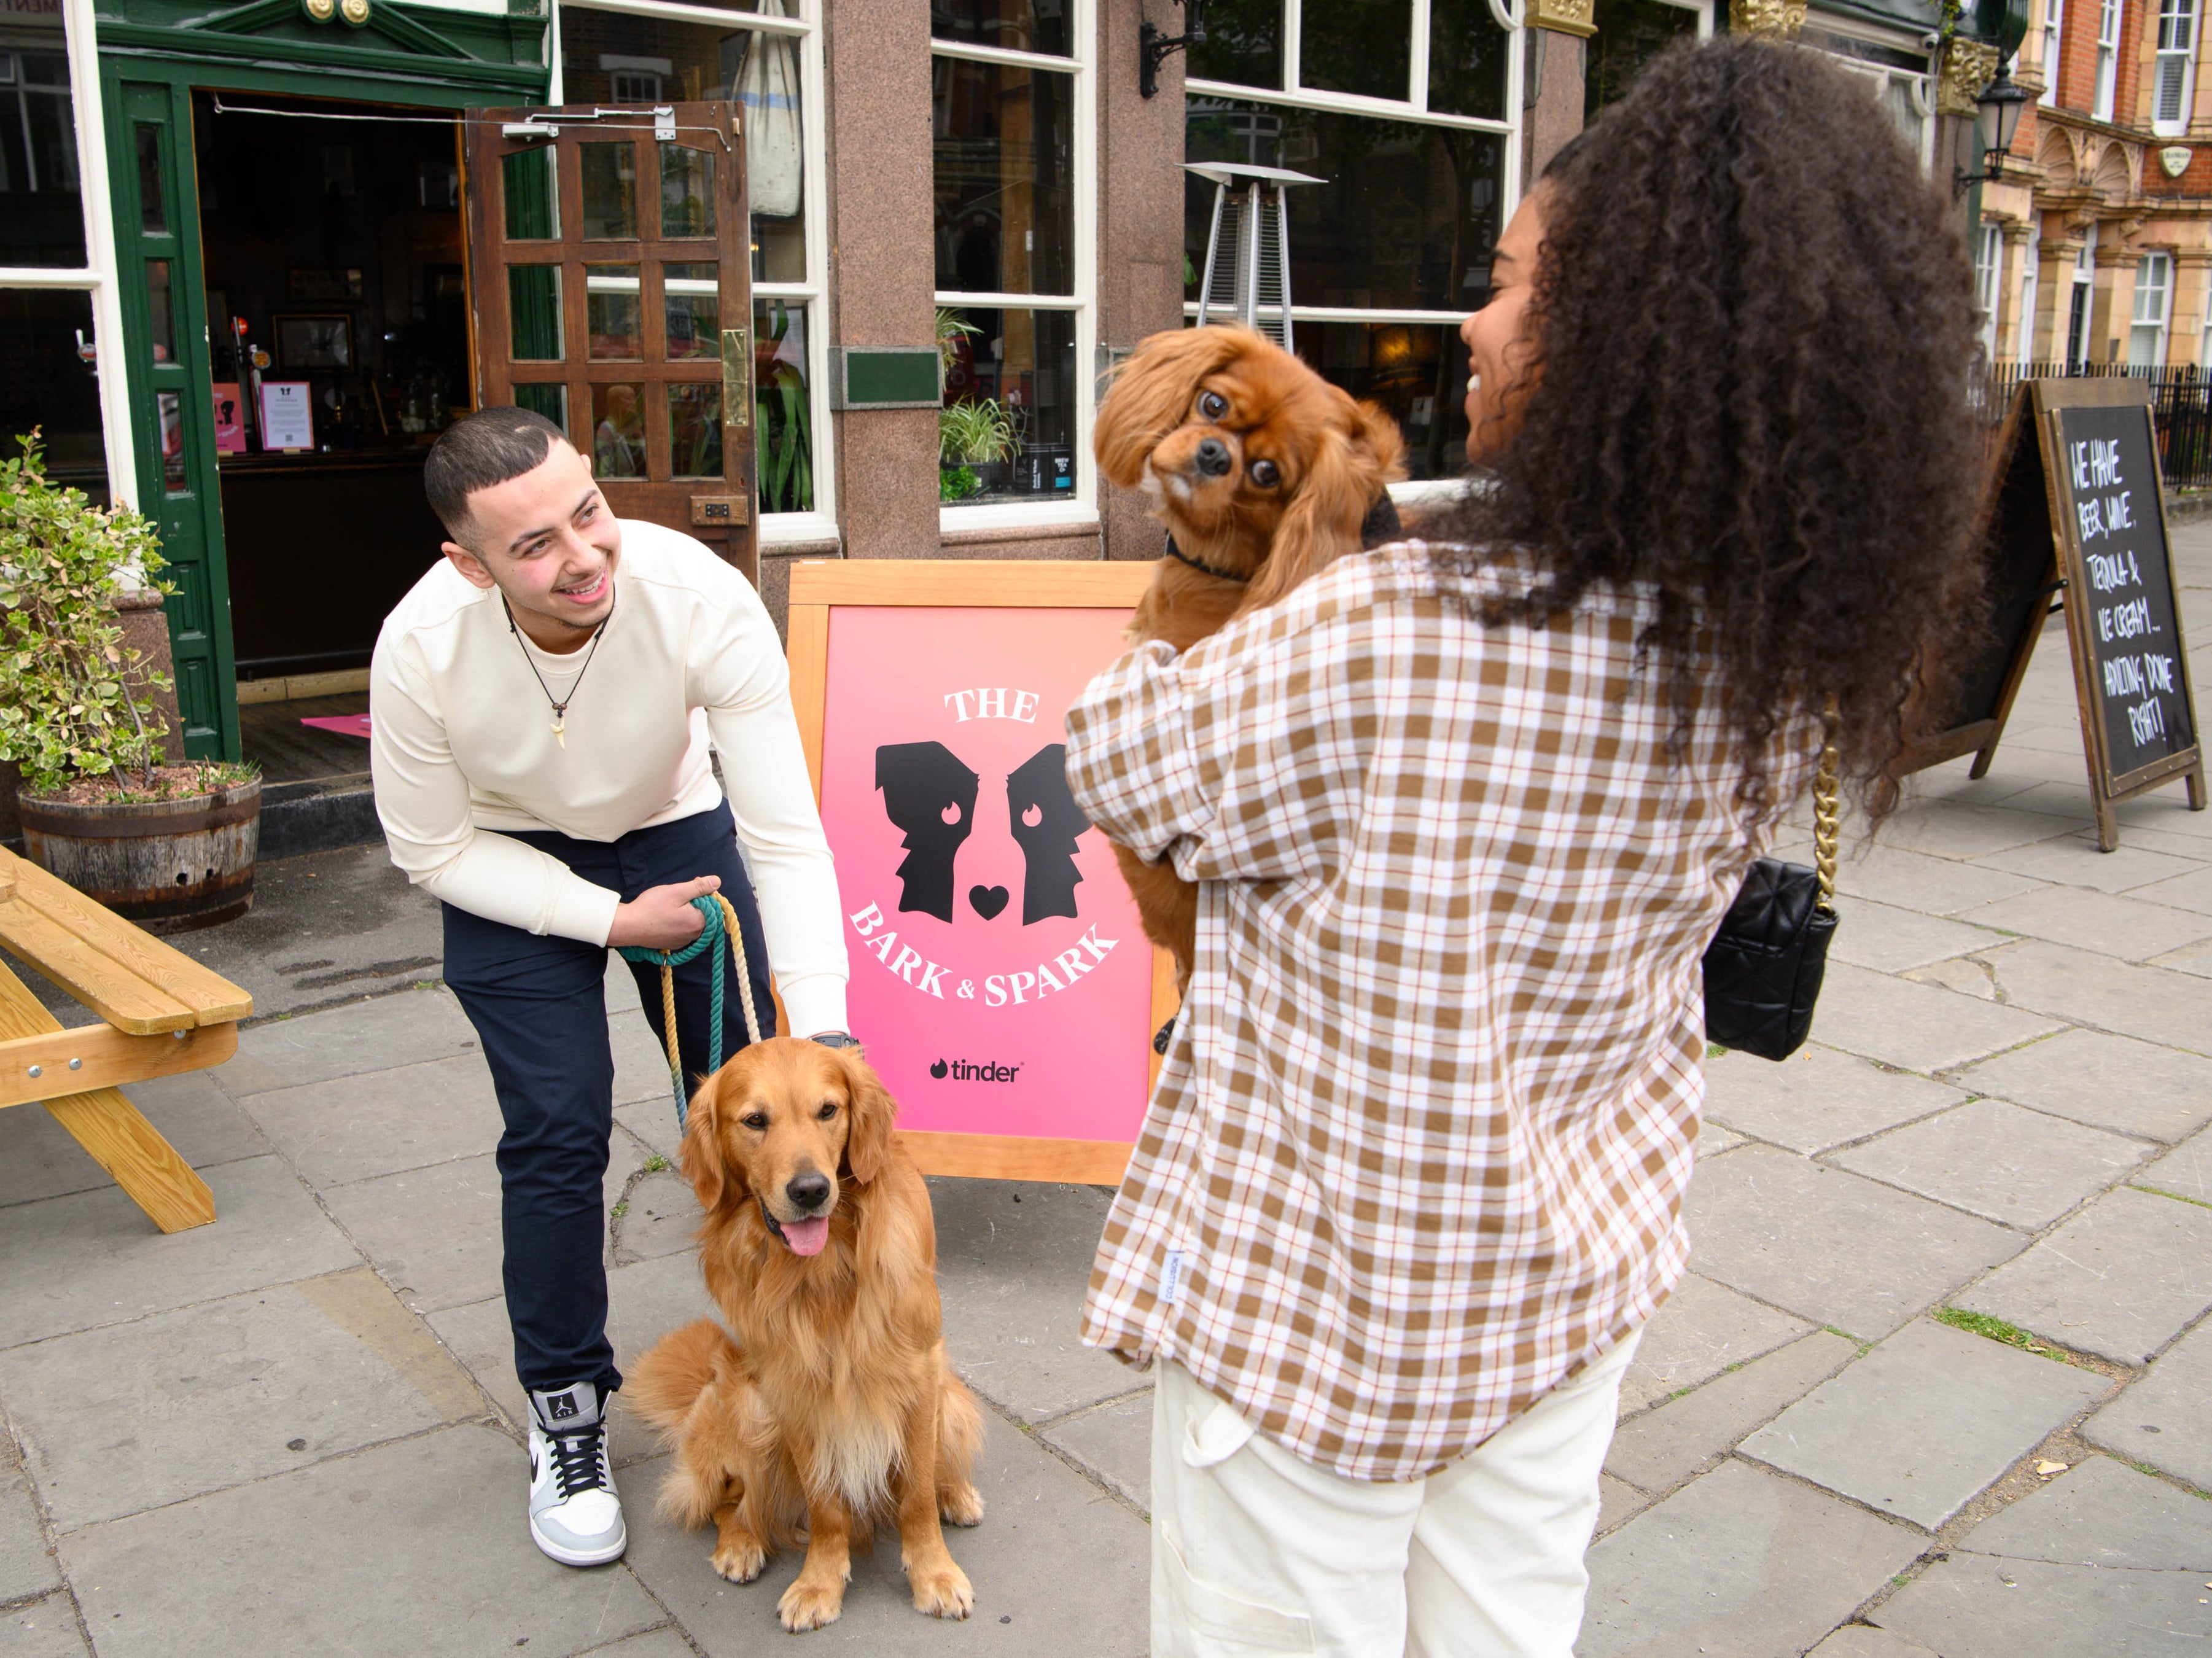 Tinder launches pop-up dating experience for dog owners | The Independent